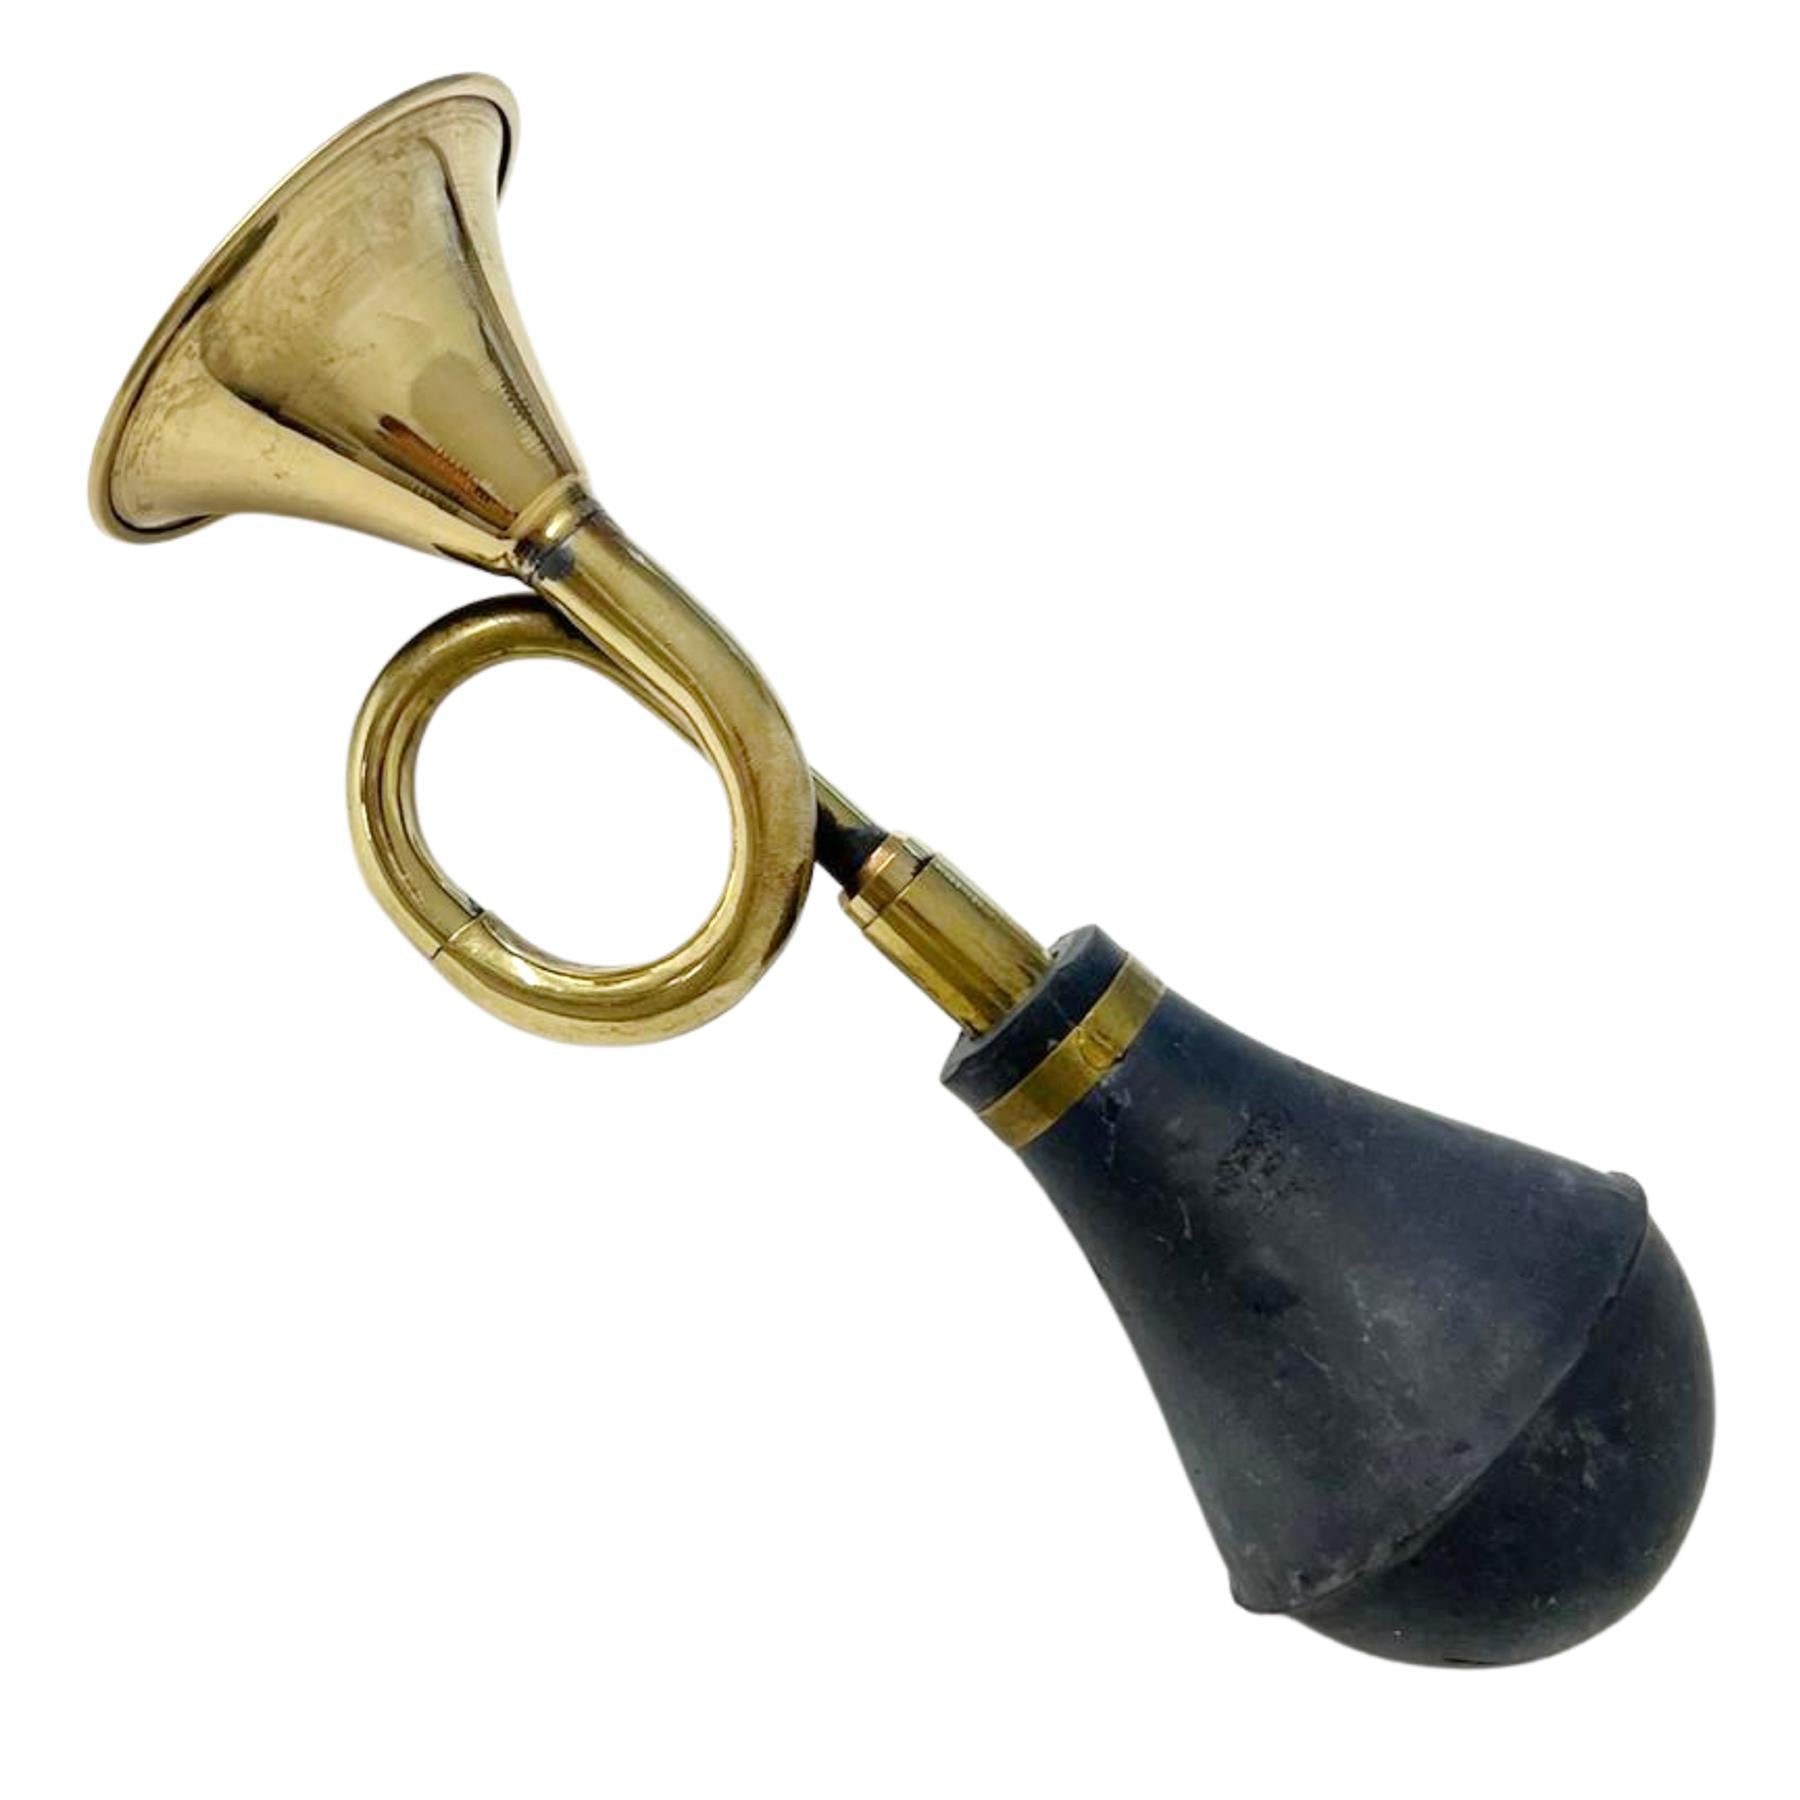 Replica vintage bulb honky horn with black rubber plunger, Air horn